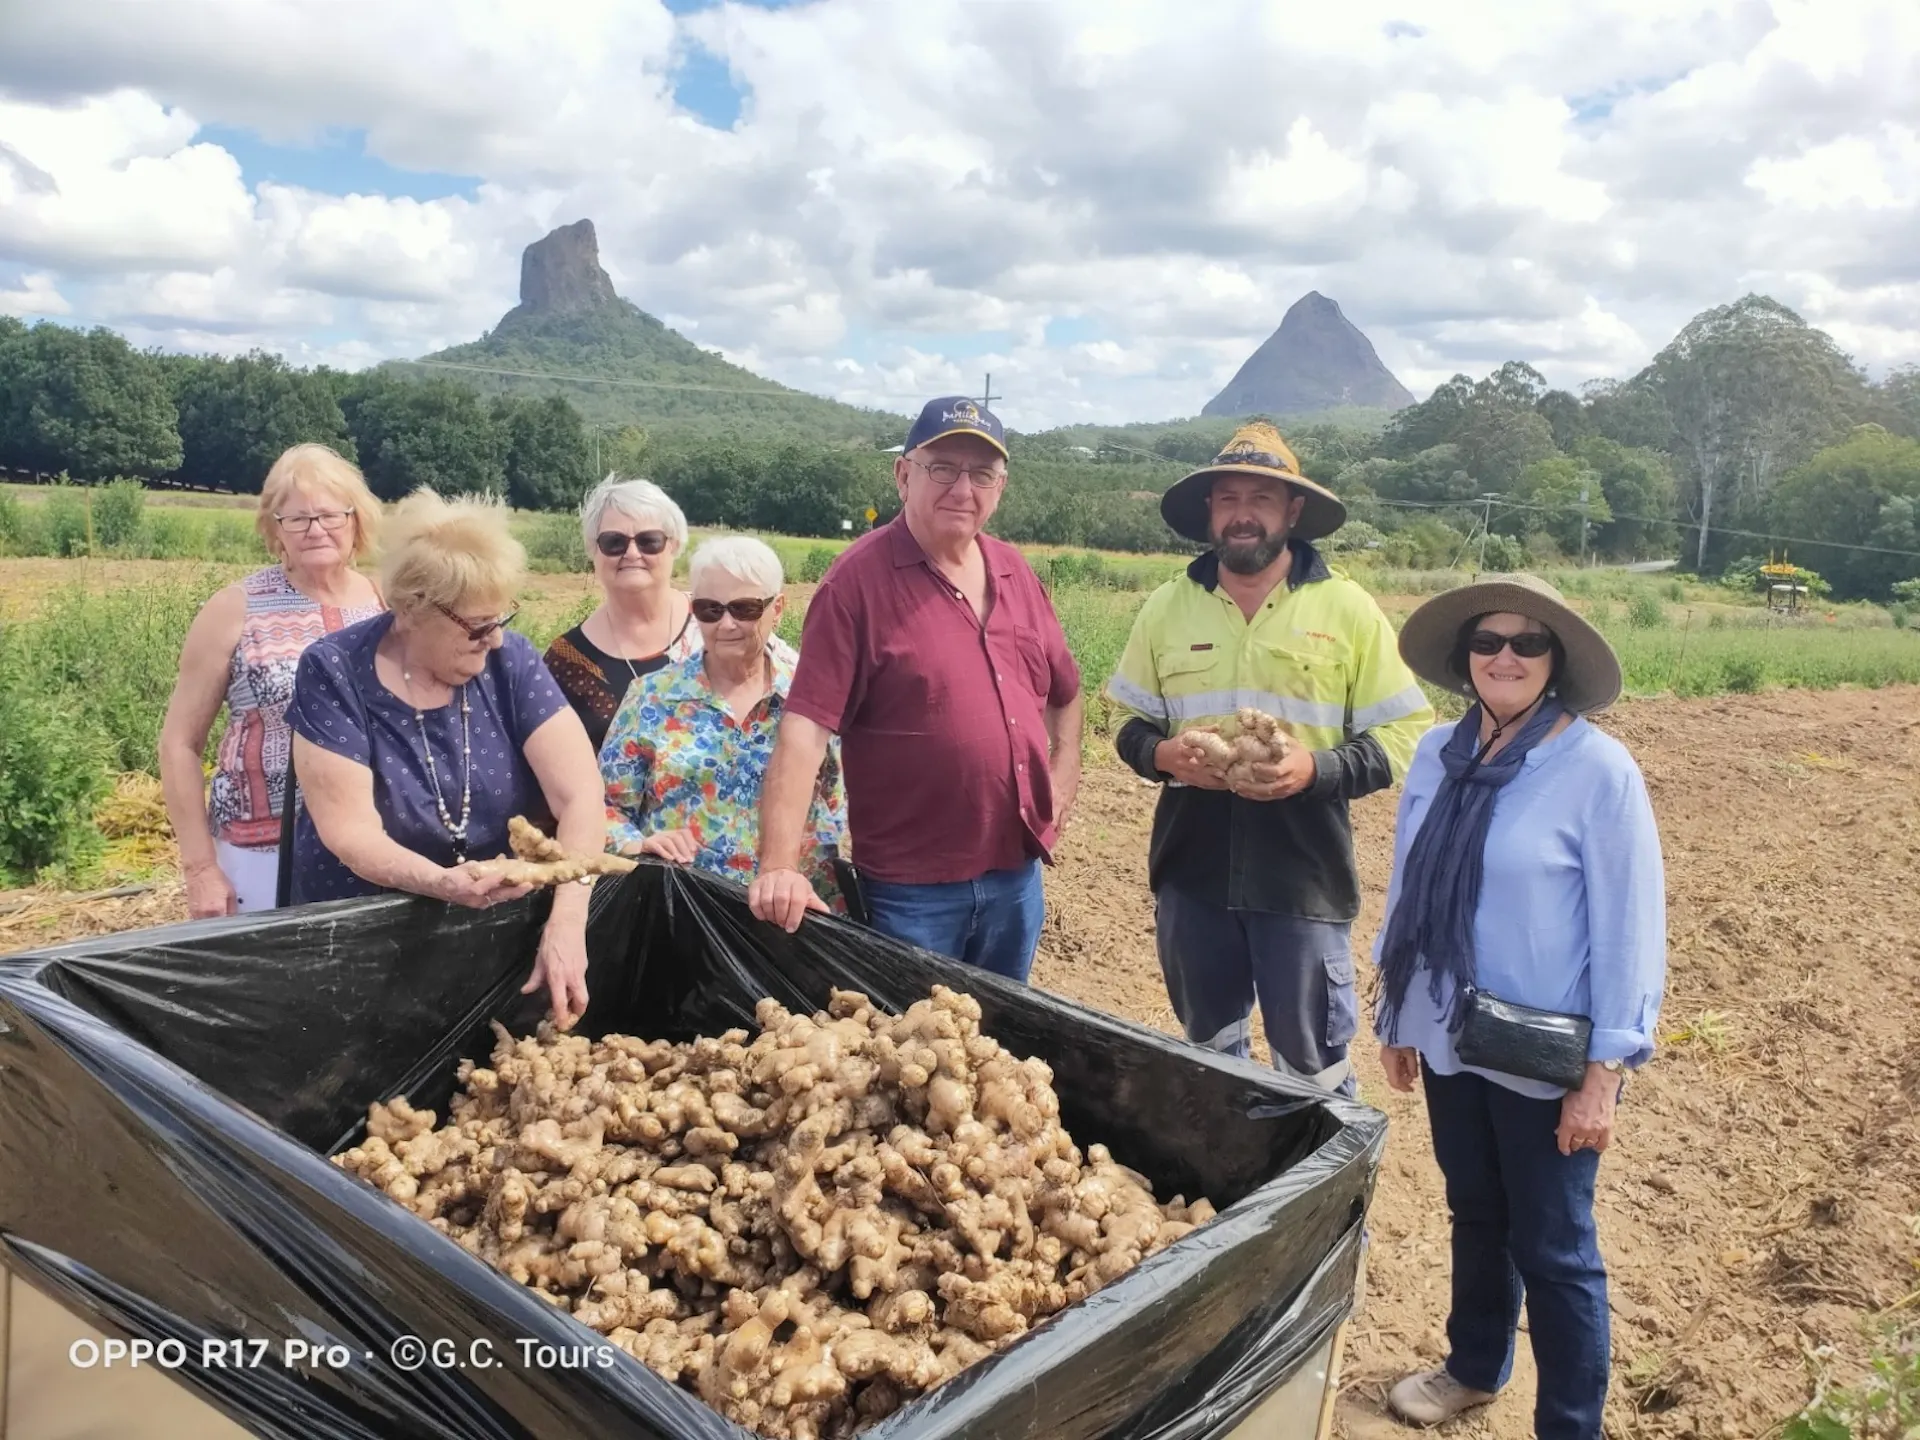 image shows 6 guests with ginger farmer and crate of fresh ginger, mountains in background